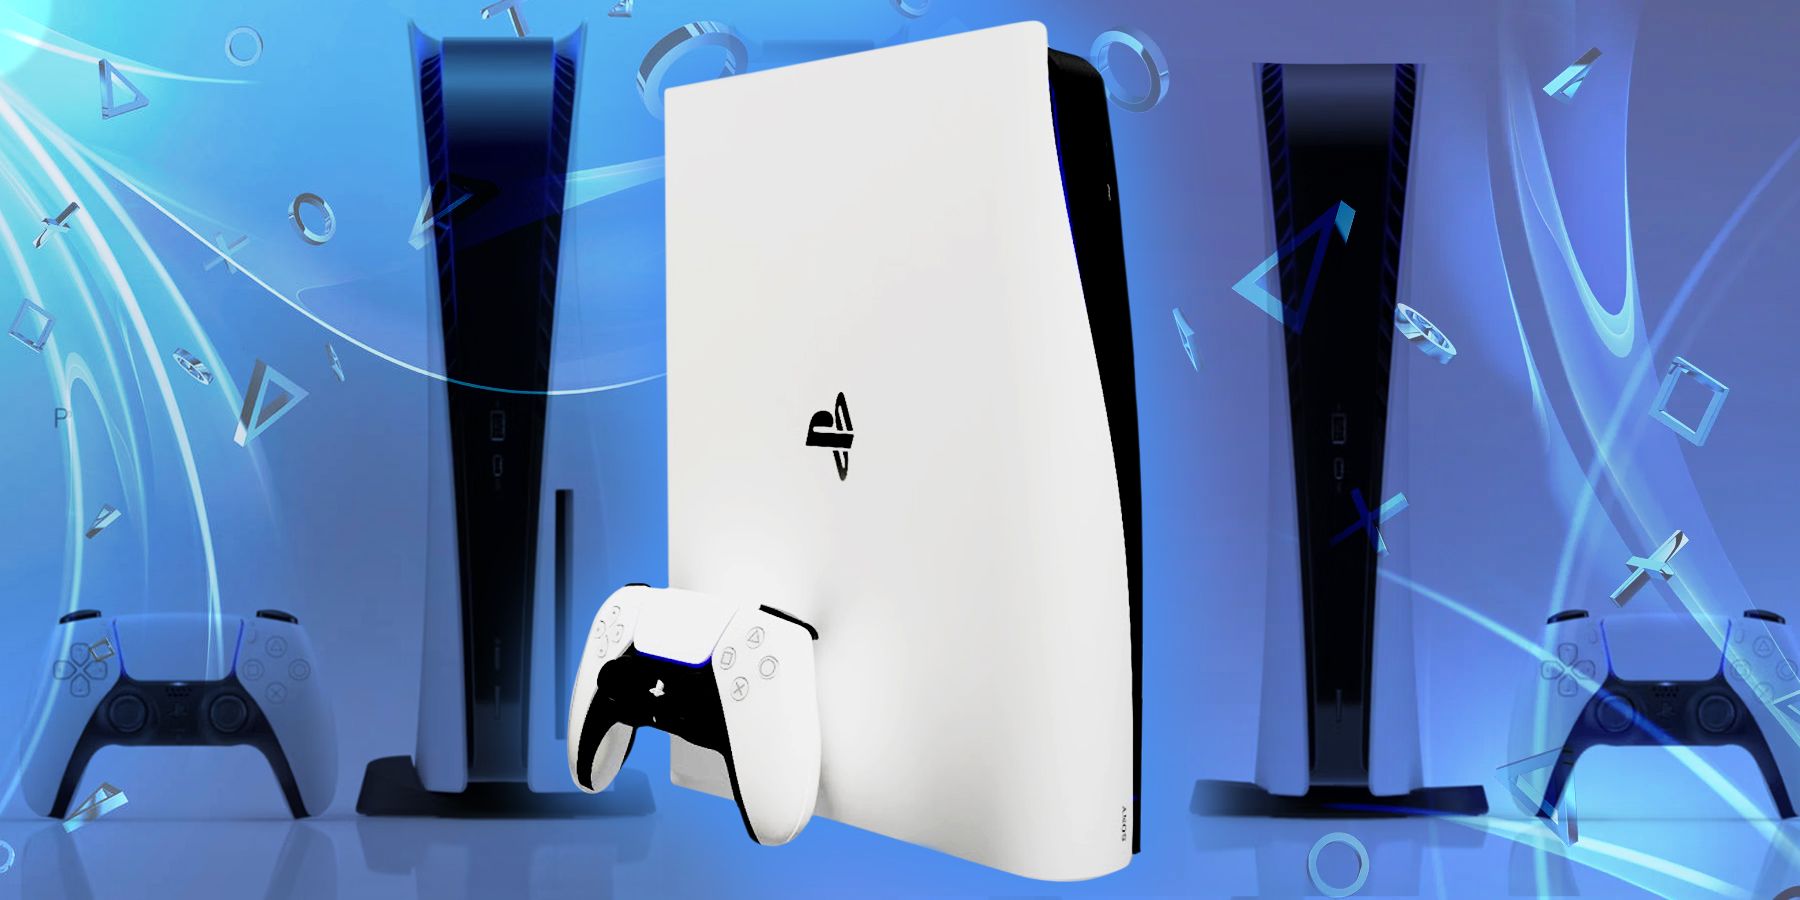 Sony is dropping a brand new slimmer PS5 console and these are the